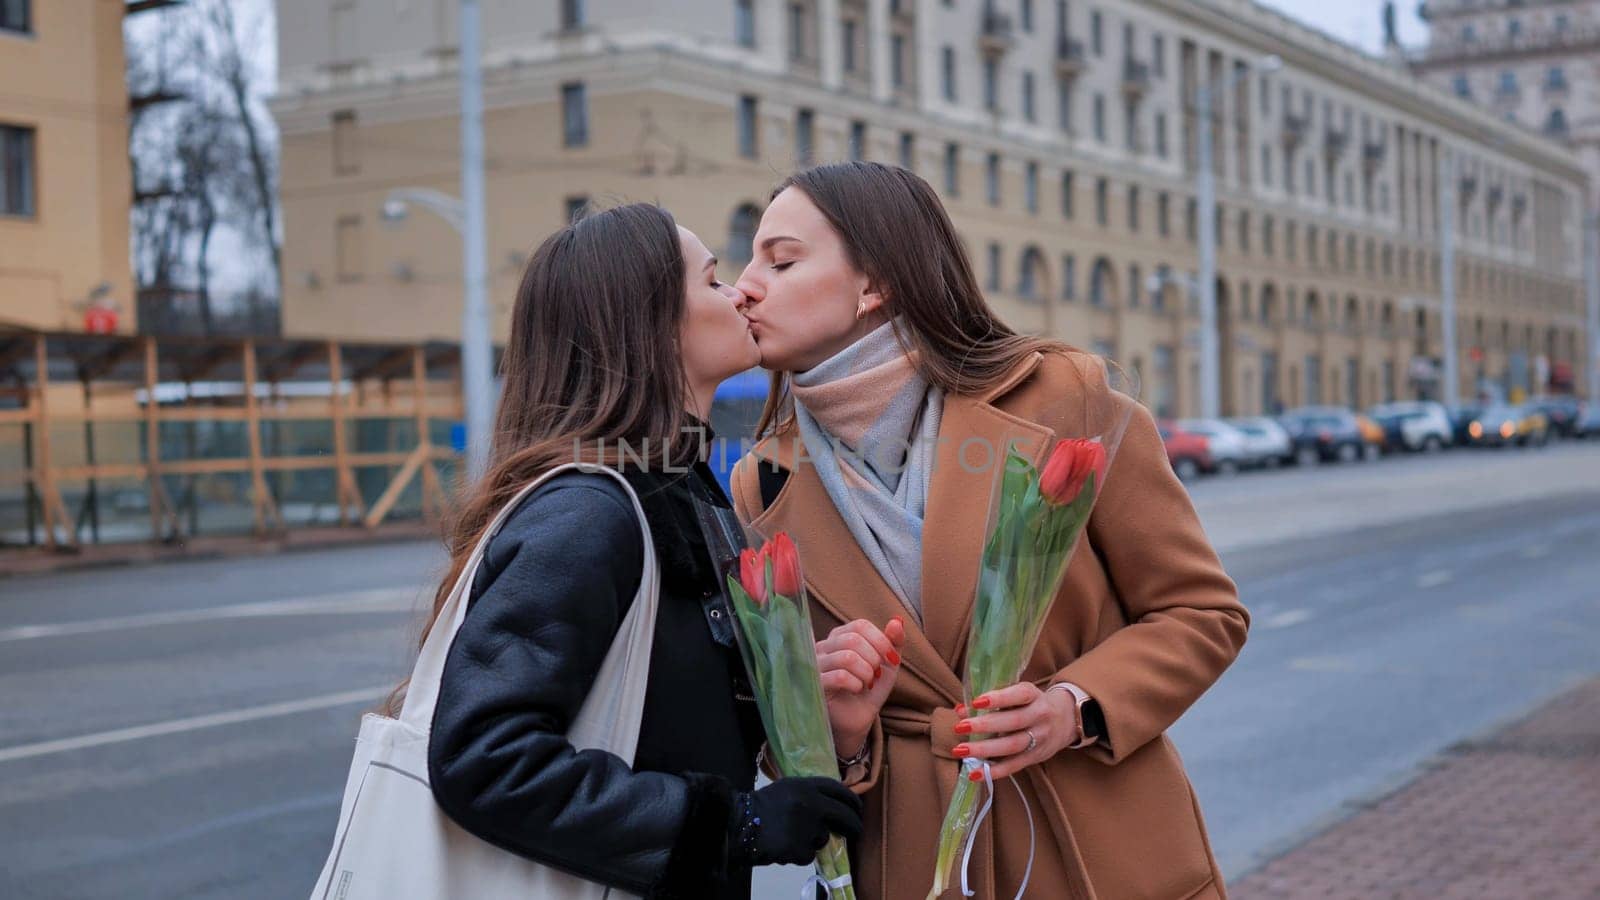 Two young women kissing each other on a city by DovidPro